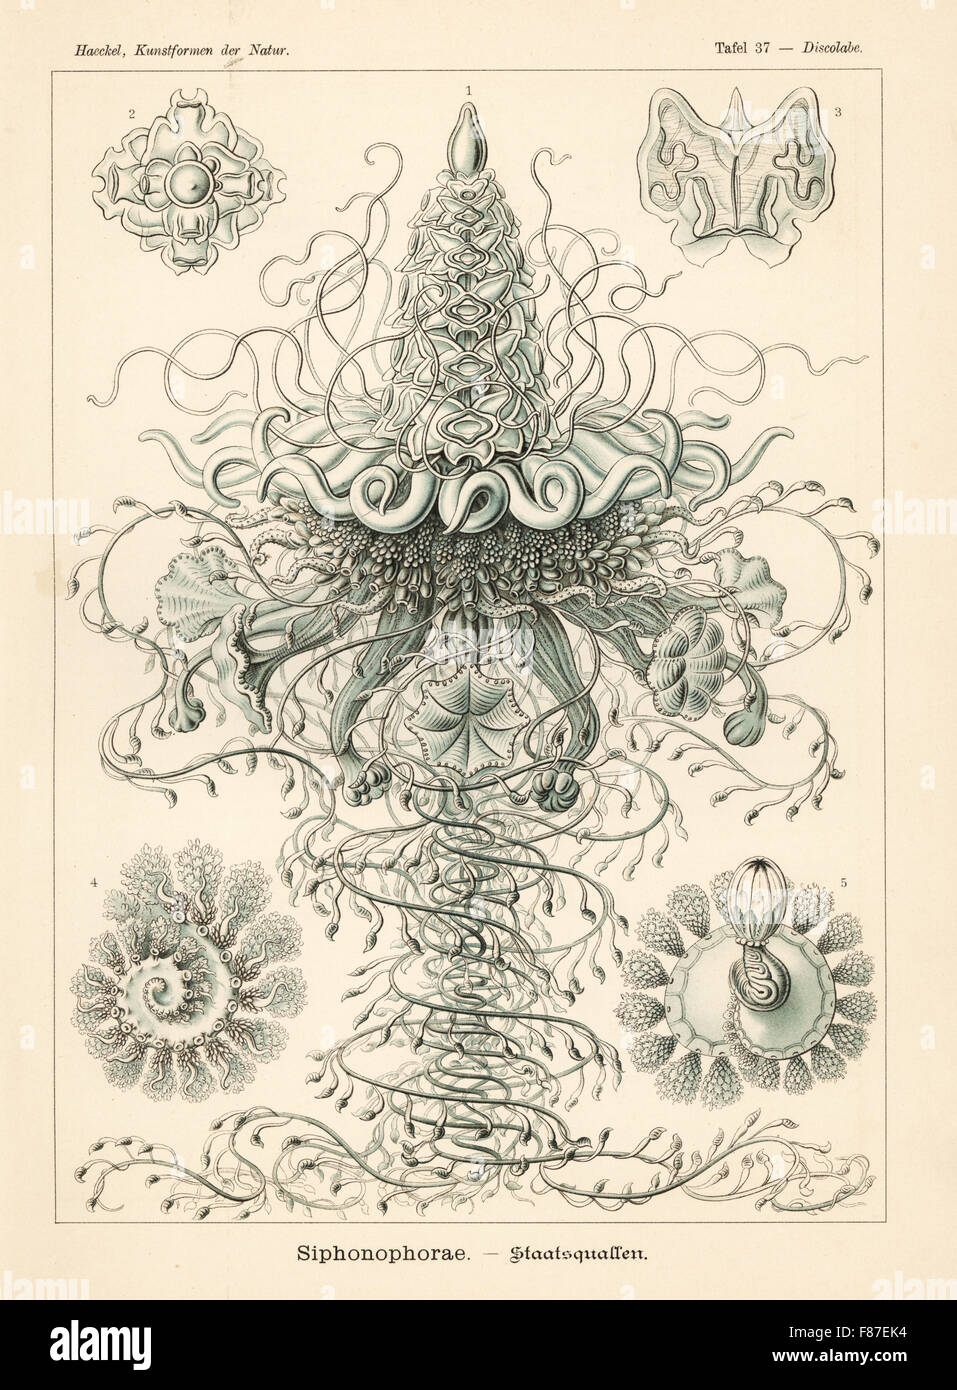 Siphonophora jellyfish colony. Physophora hydrostatica (Discolabe quadrigata), colony, gas bladder, swimming bell, polyp, etc. Chromolithograph by Adolf Glitsch from an illustration by Ernst Haeckel from Art Forms in Nature, Kunstformen der Natur, Liepzig, Germany, 1904. Stock Photo